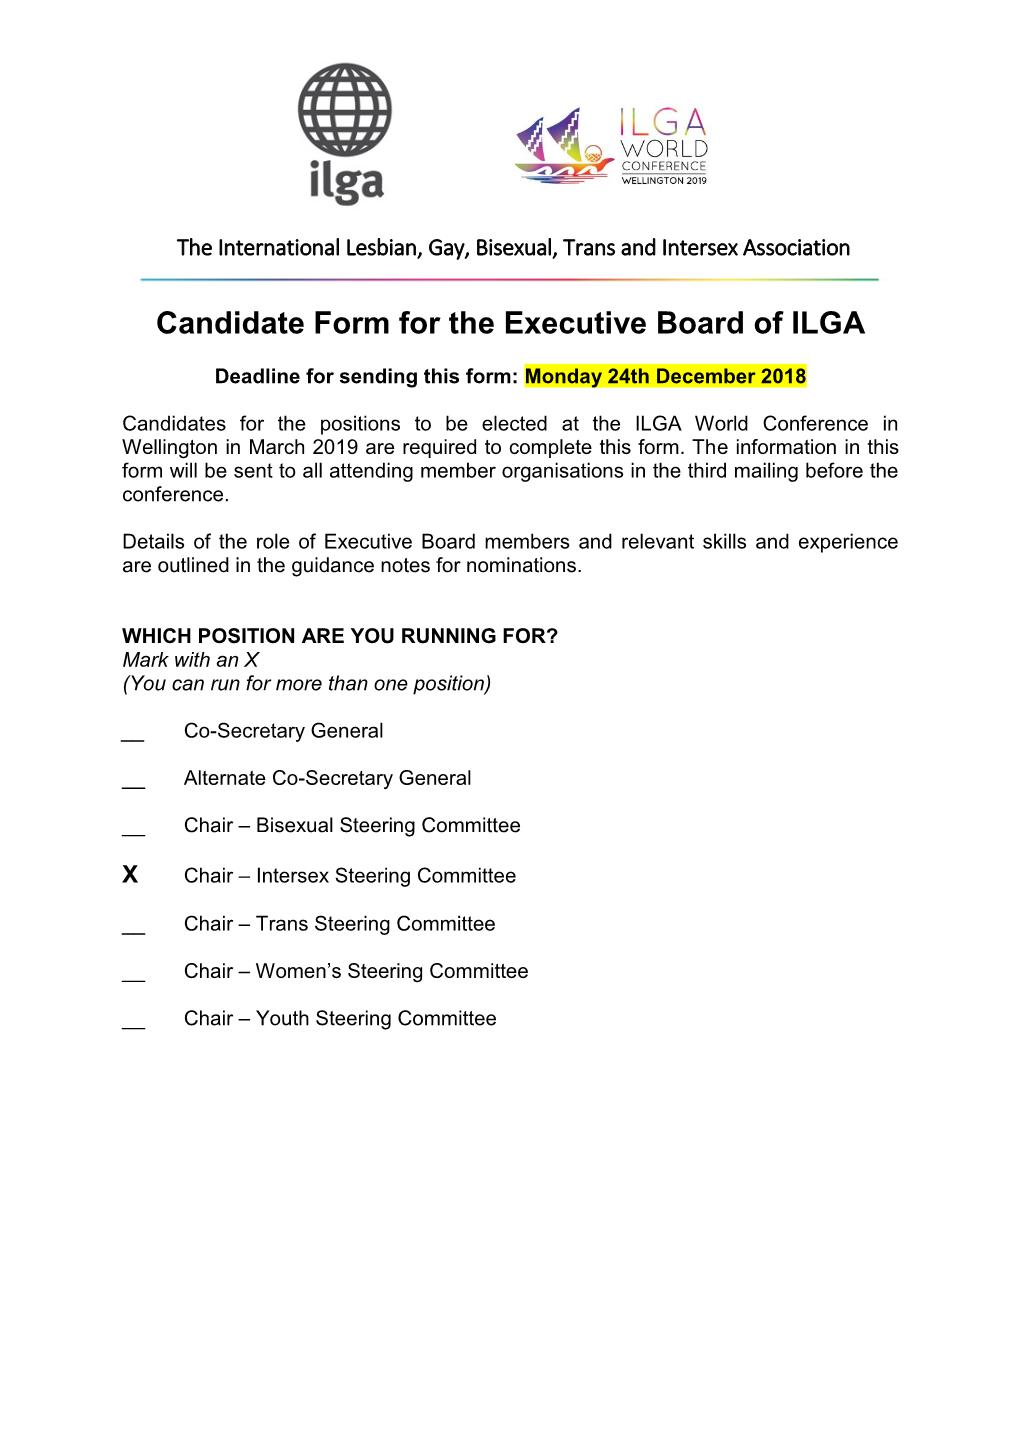 Candidate Form for the Executive Board of ILGA